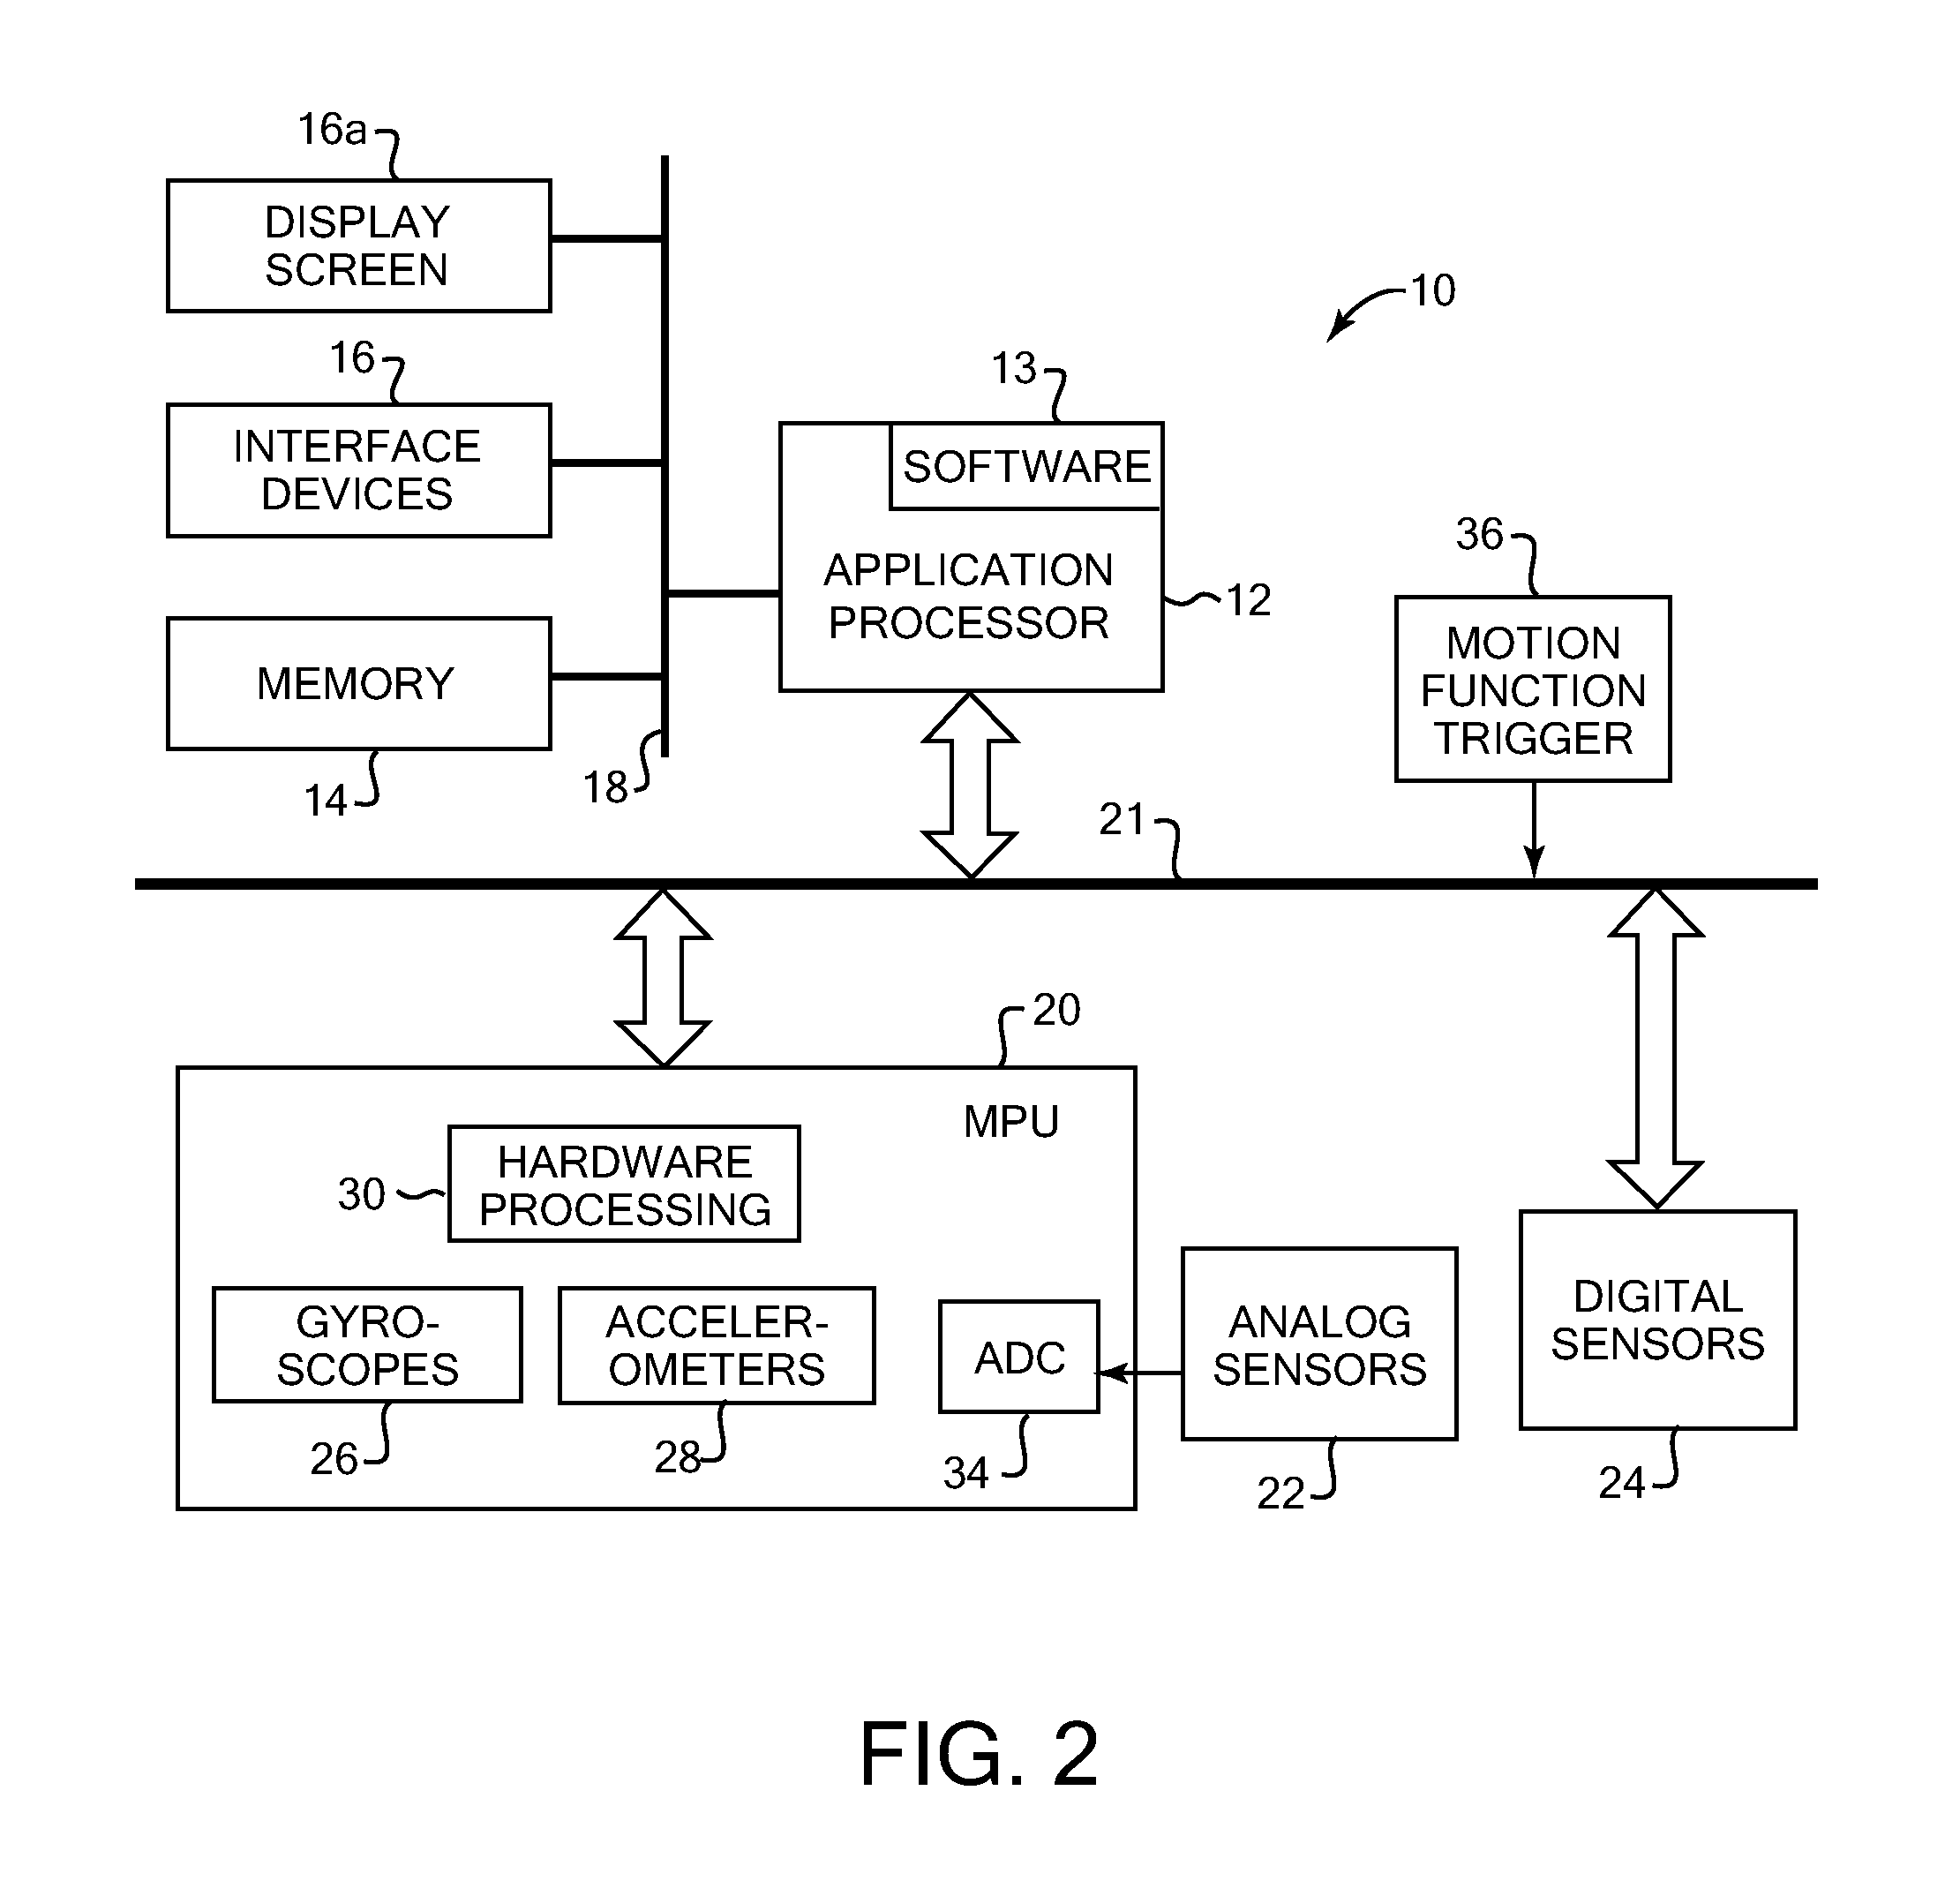 Selectable communication interface configurations for motion sensing device